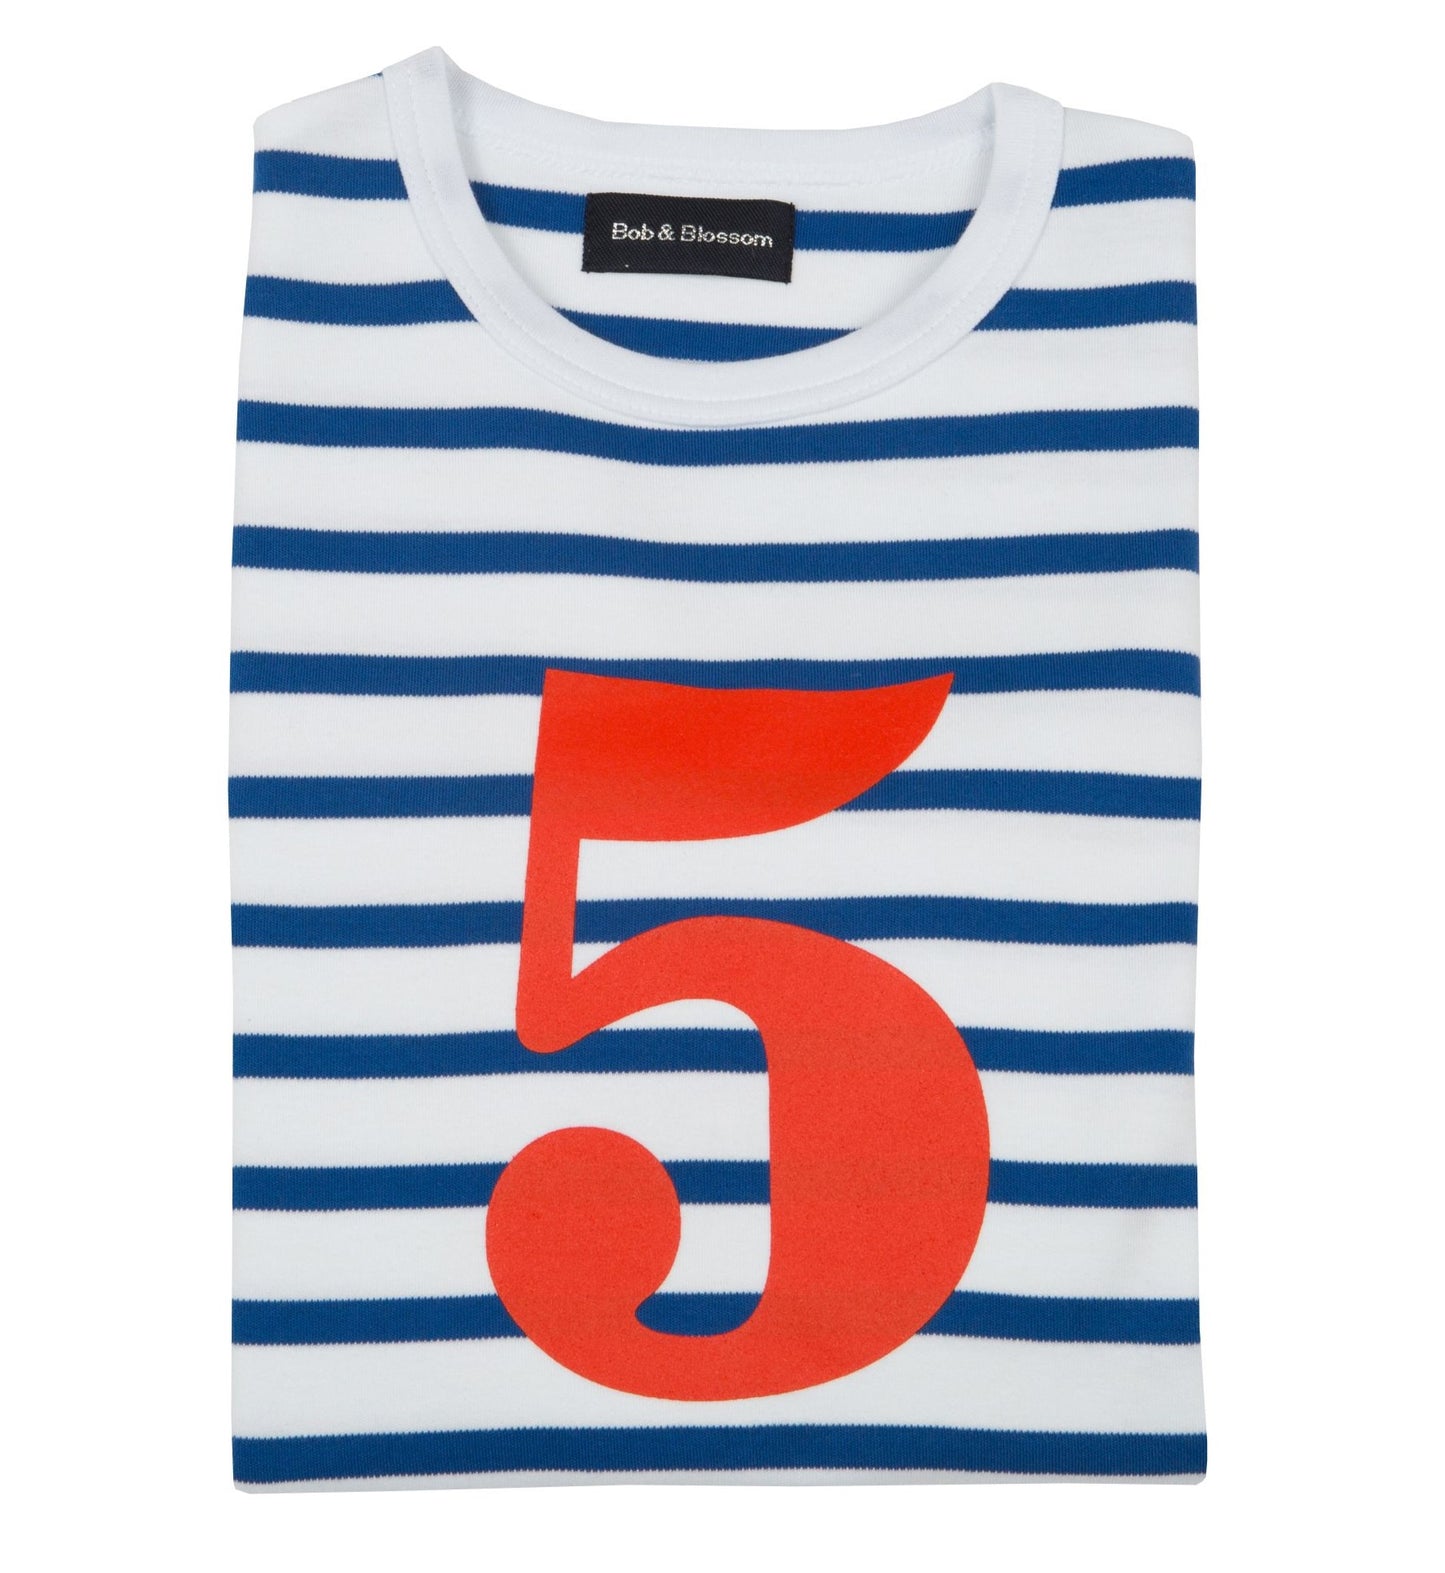 bob & blossom breton stripe top with number on the front at whippersnappers online